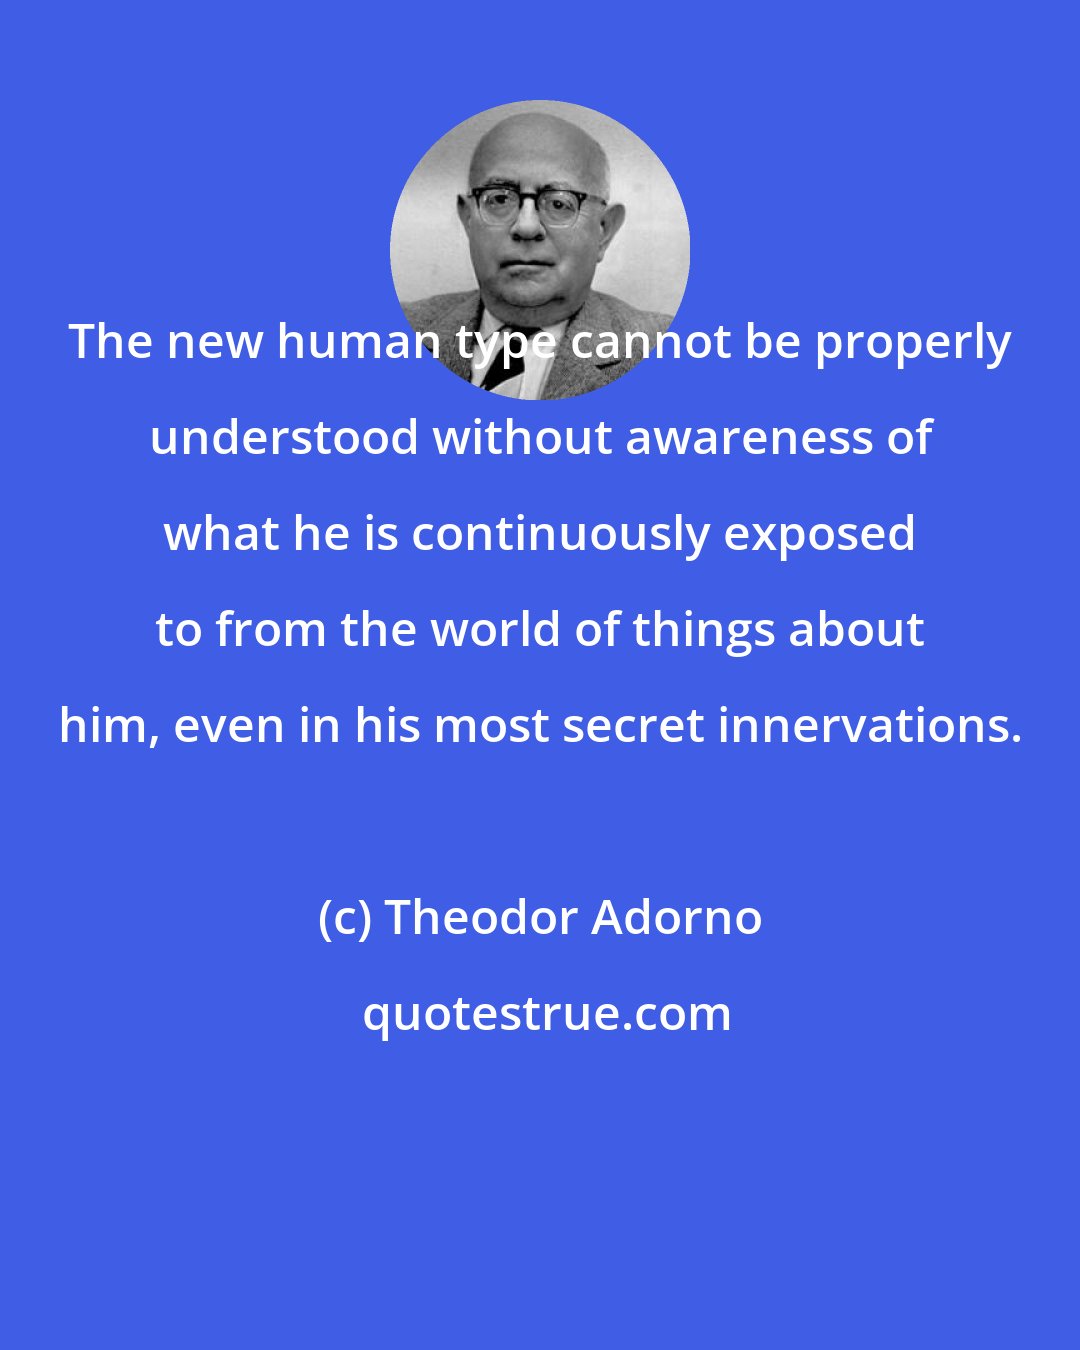 Theodor Adorno: The new human type cannot be properly understood without awareness of what he is continuously exposed to from the world of things about him, even in his most secret innervations.